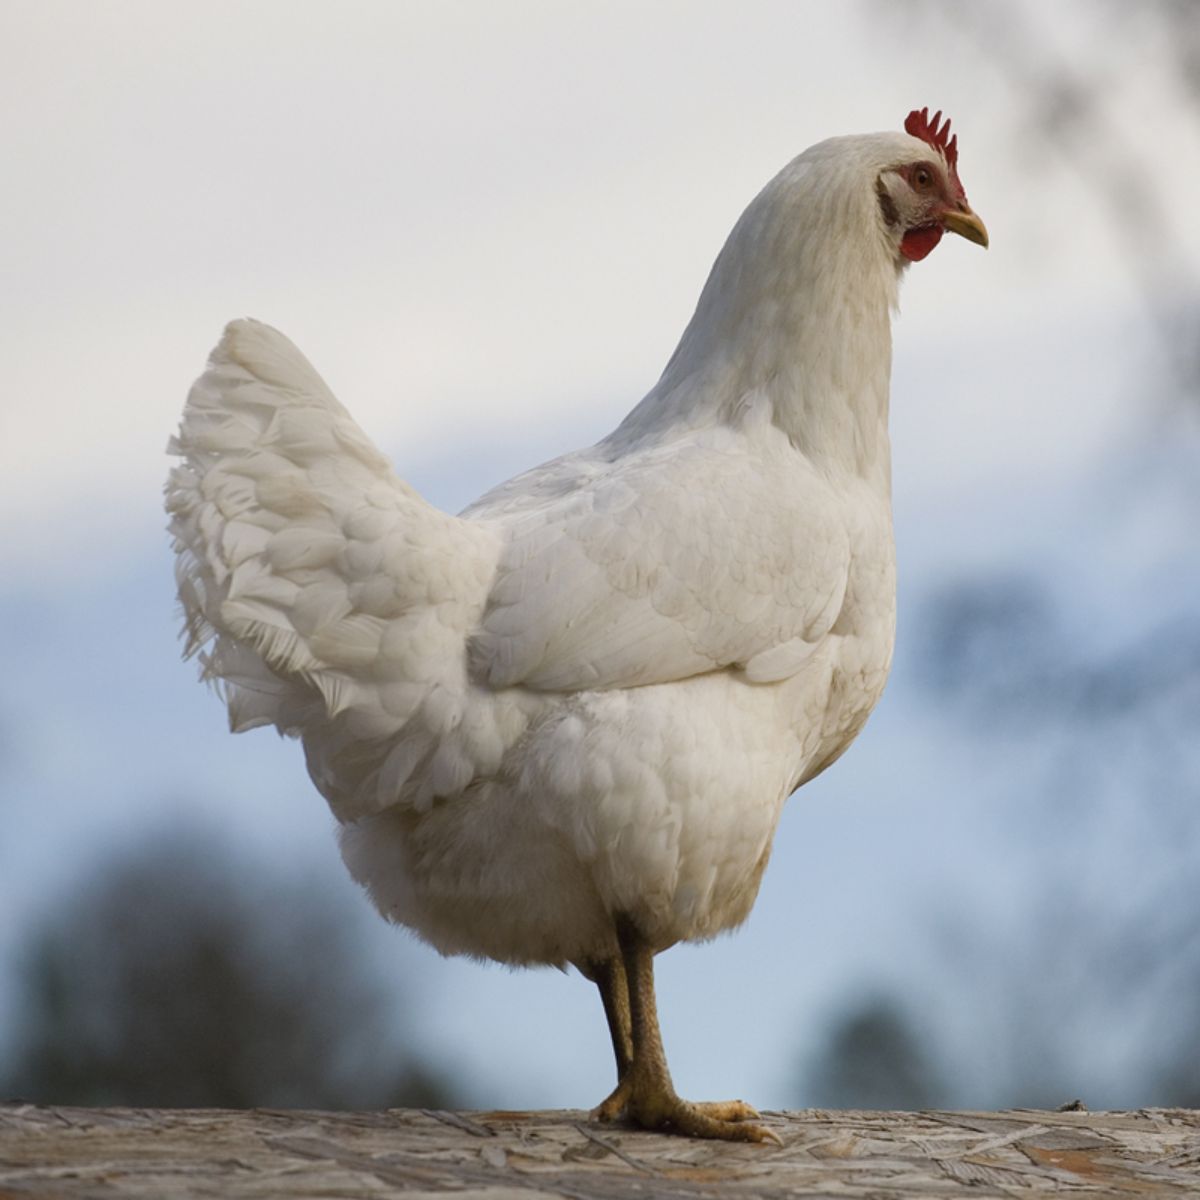 A White Rock hen perched on a wooden pole.